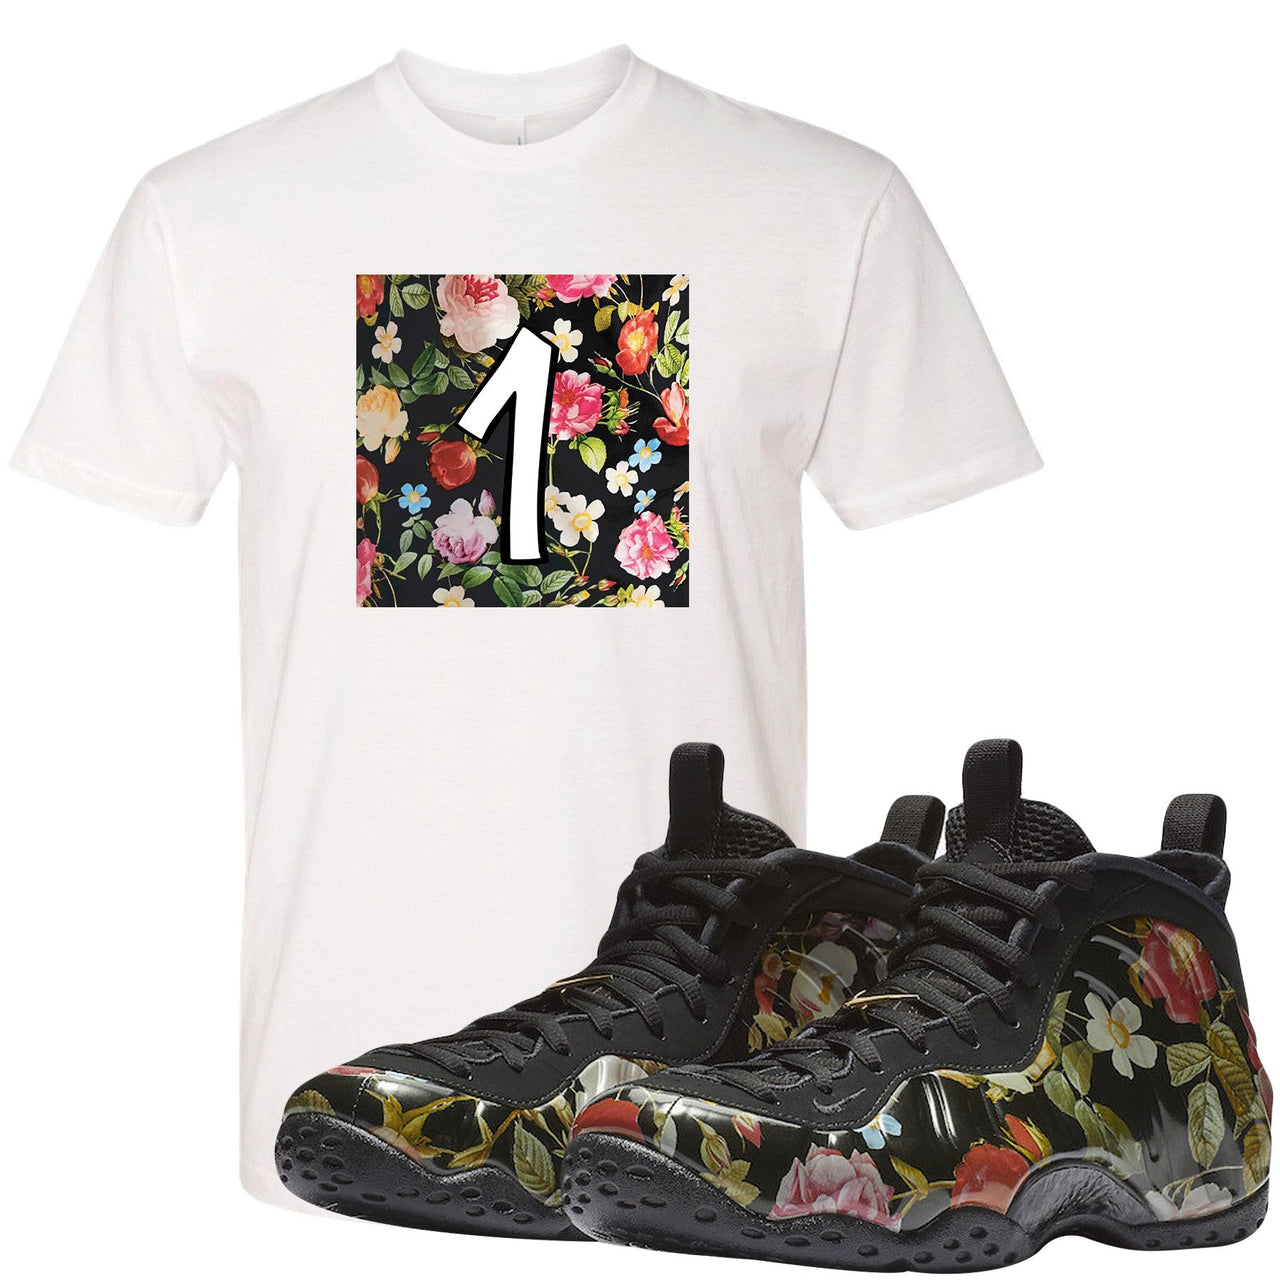 Wear this sneaker matching t-shirt to match your Air Foamposite One Floral sneakers. Match your floral foams today!